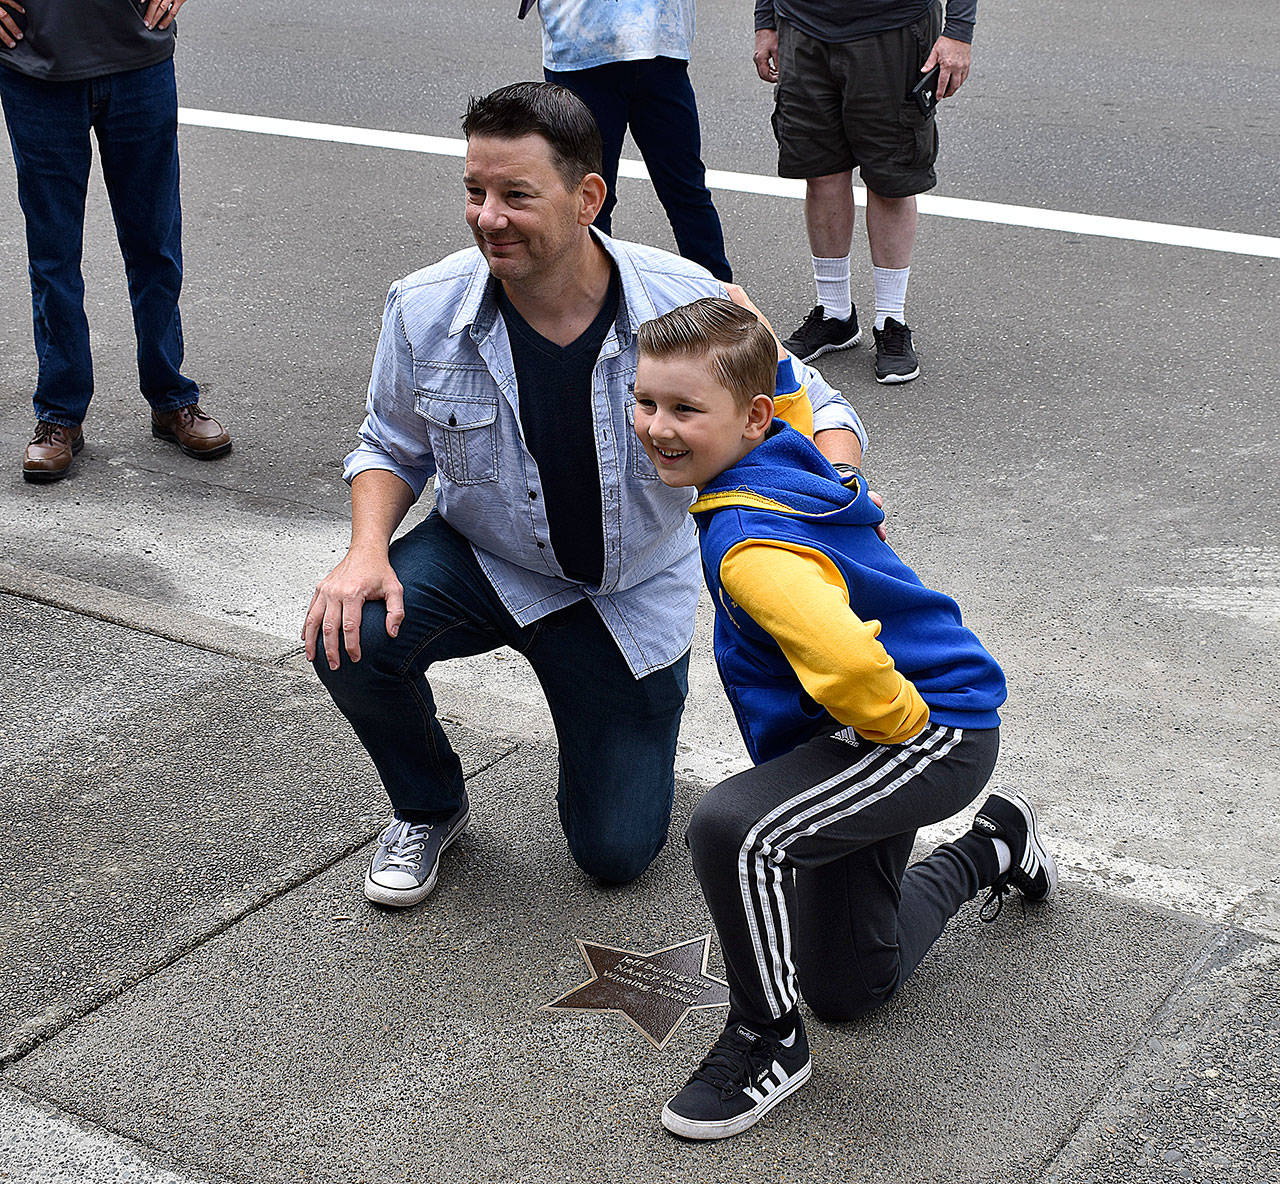 DAN HAMMOCK / THE DAILY WORLD 
Author Jeff Burlingame and his son, Grayson, at the dedication of Burlingame’s star on the Aberdeen Walk of Fame in front of the Aberdeen Timberland Regional Library on Market Street Saturday.